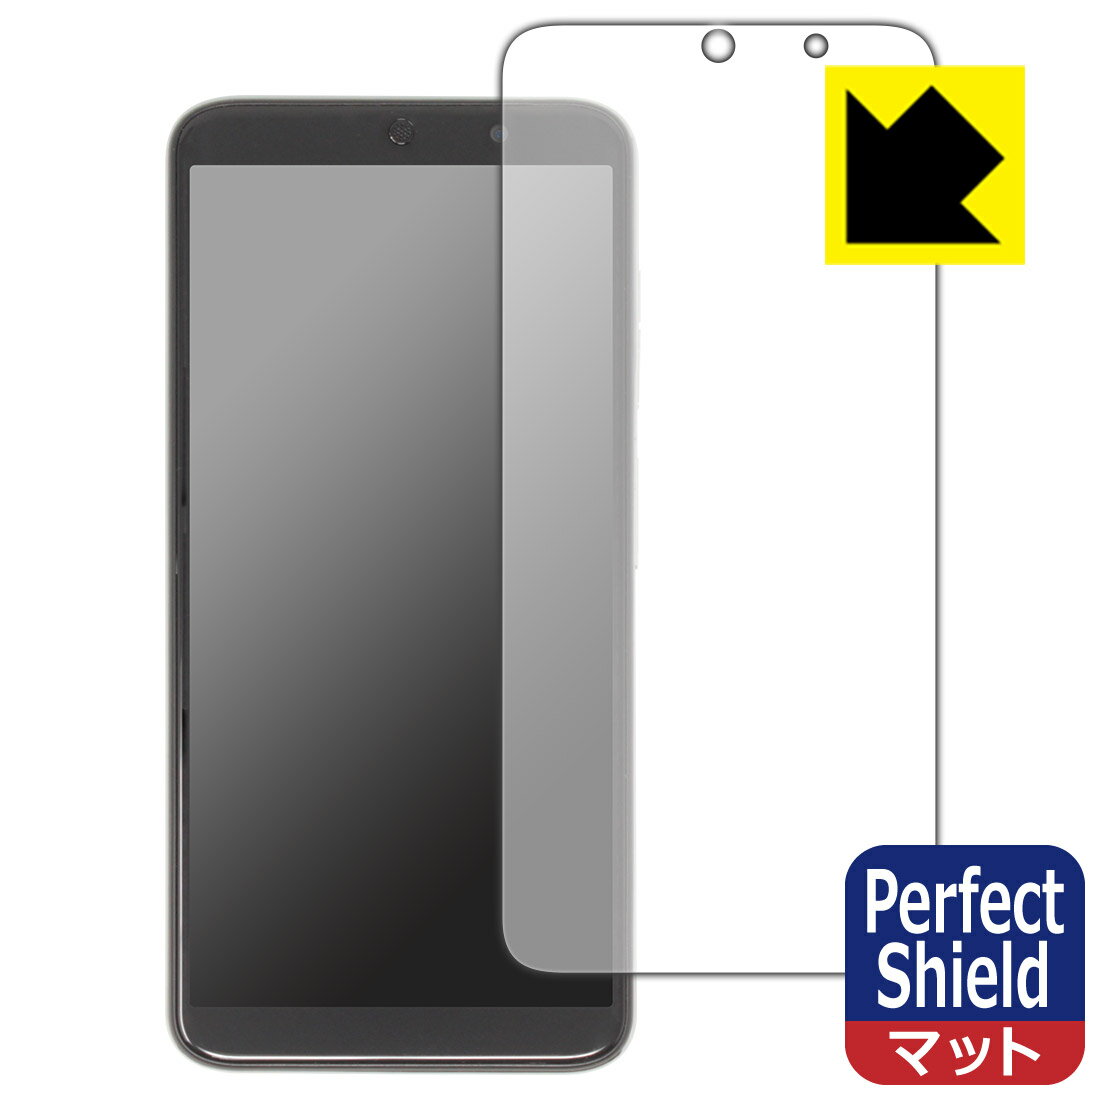 Perfect Shield【反射低減】保護フィルム Jectse Jectse1kuqi3dwz0 / Jectsemsb9rnh7wv / Jectser6pnaghtc0 / Yunseityw6dgr0vuyt (3枚セット) 日本製 自社製造直販